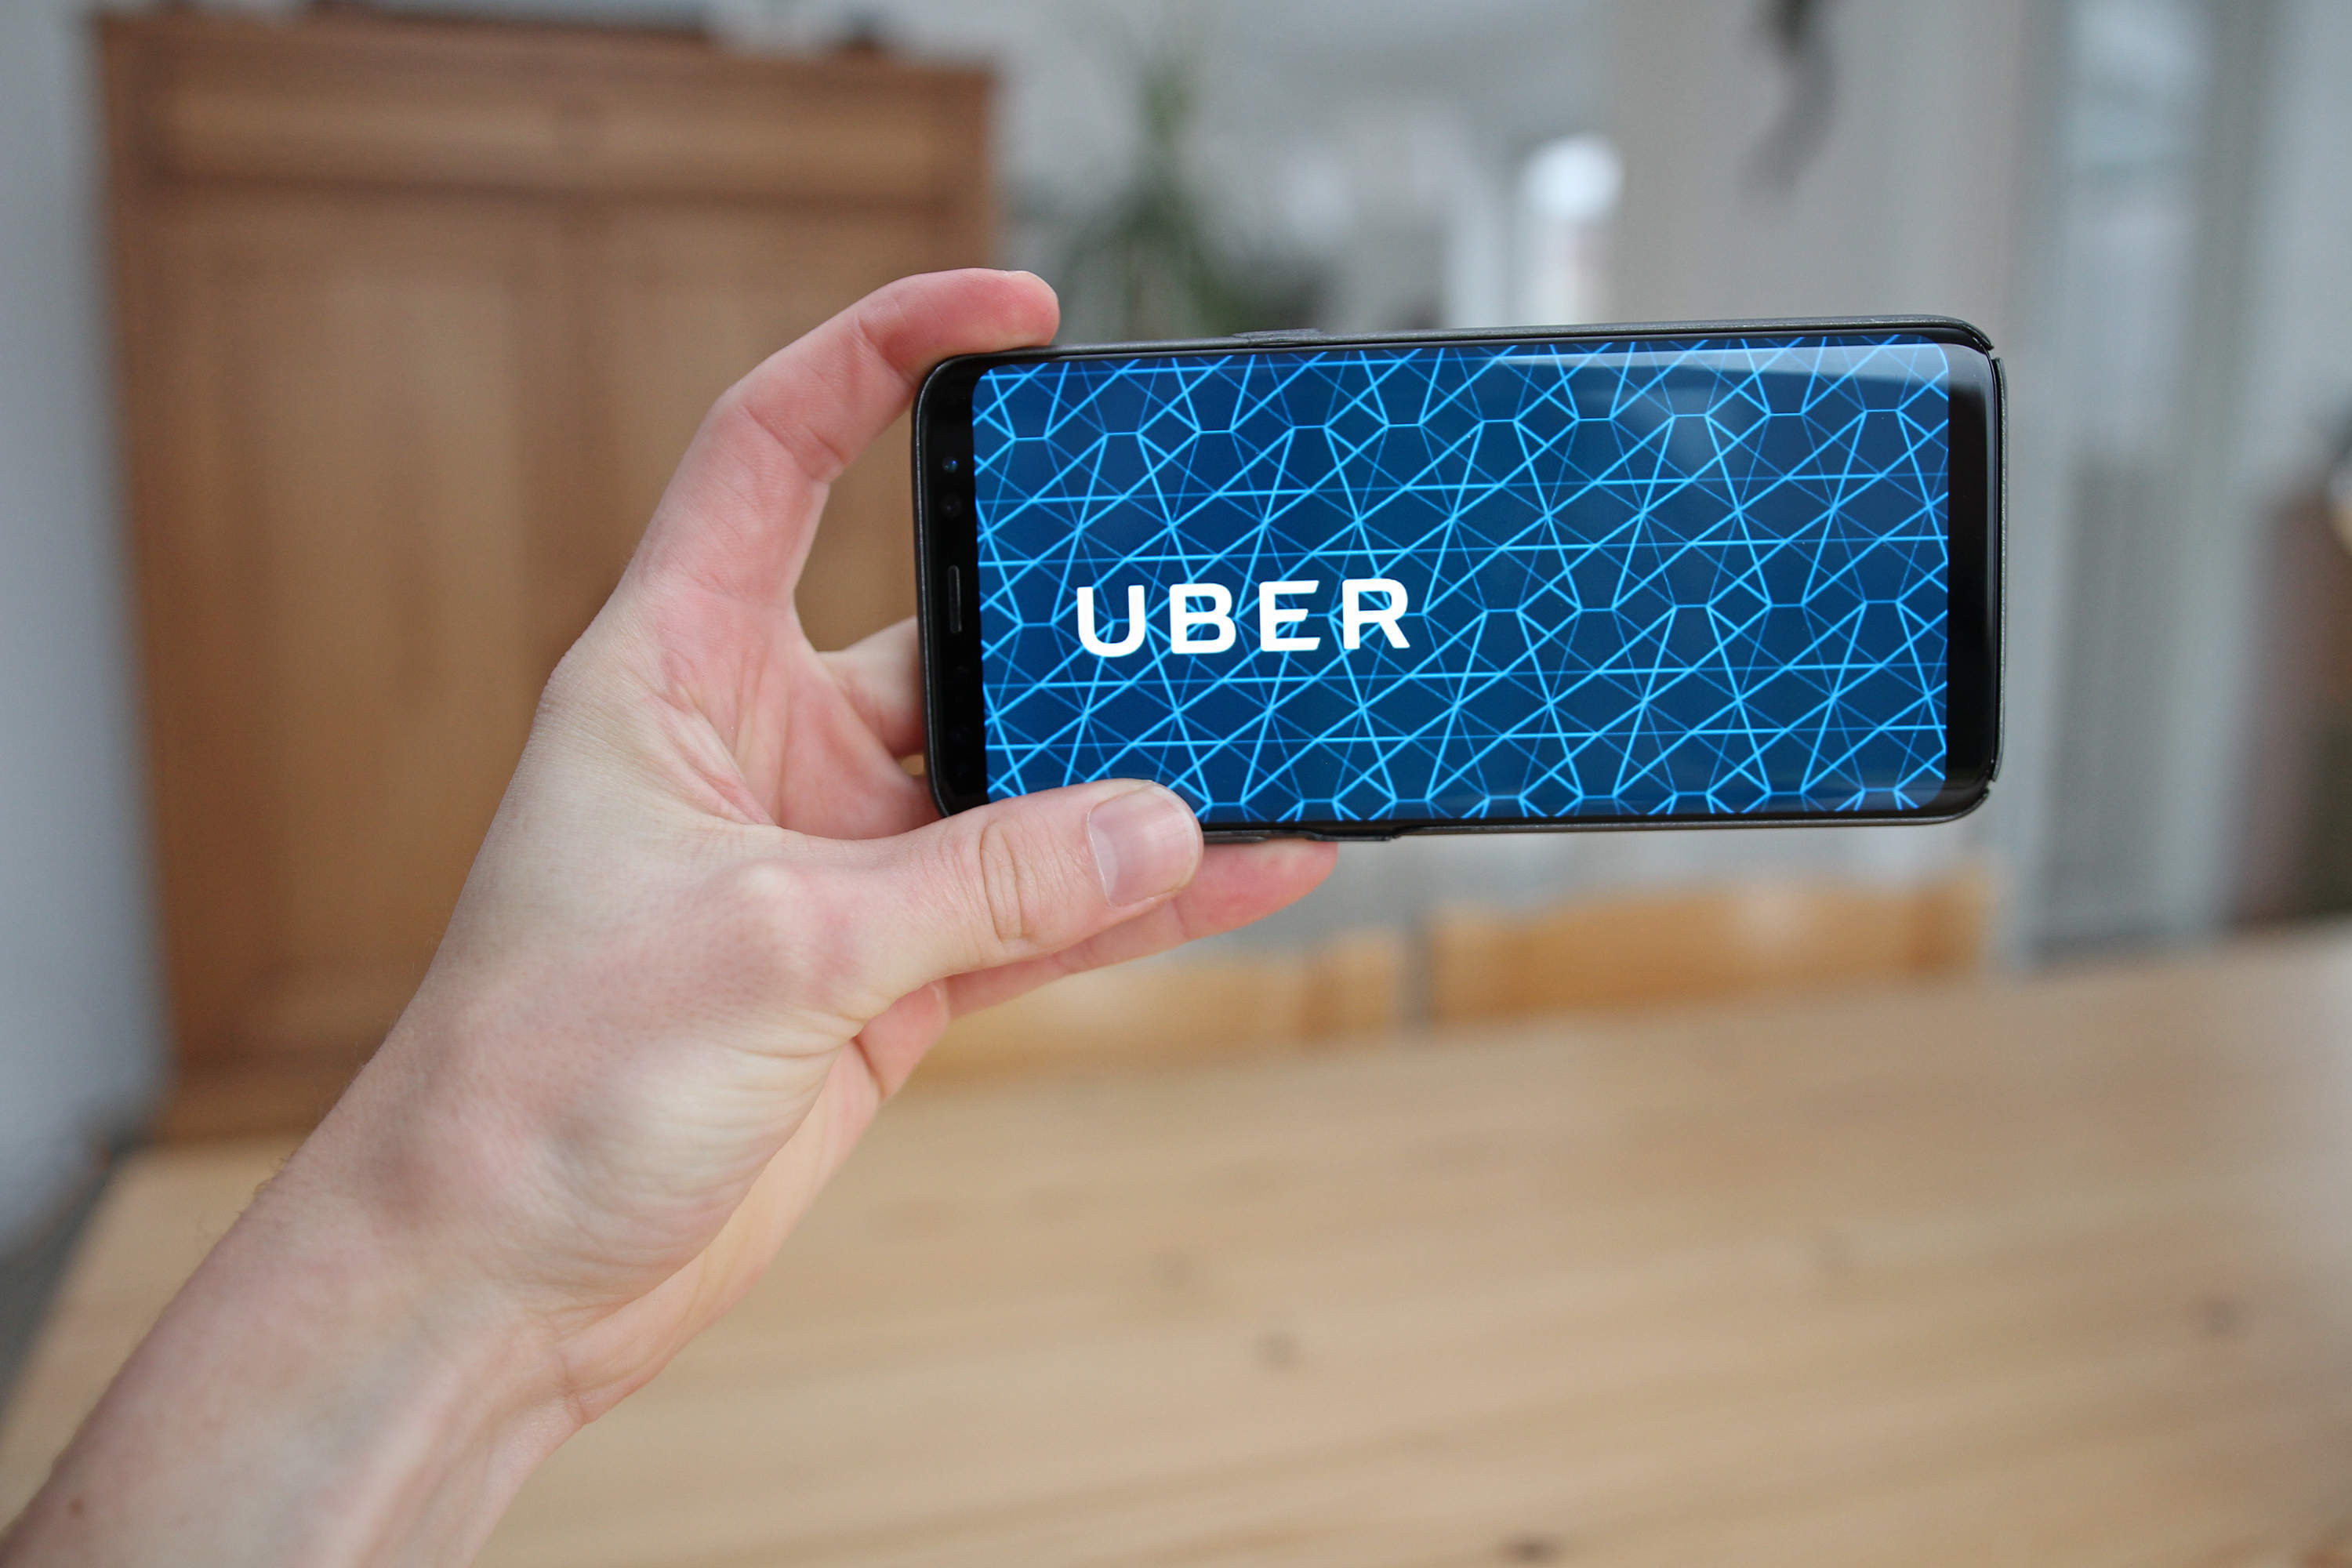 Uber adds negligence lawsuit to its list of problems following data hack disclosure